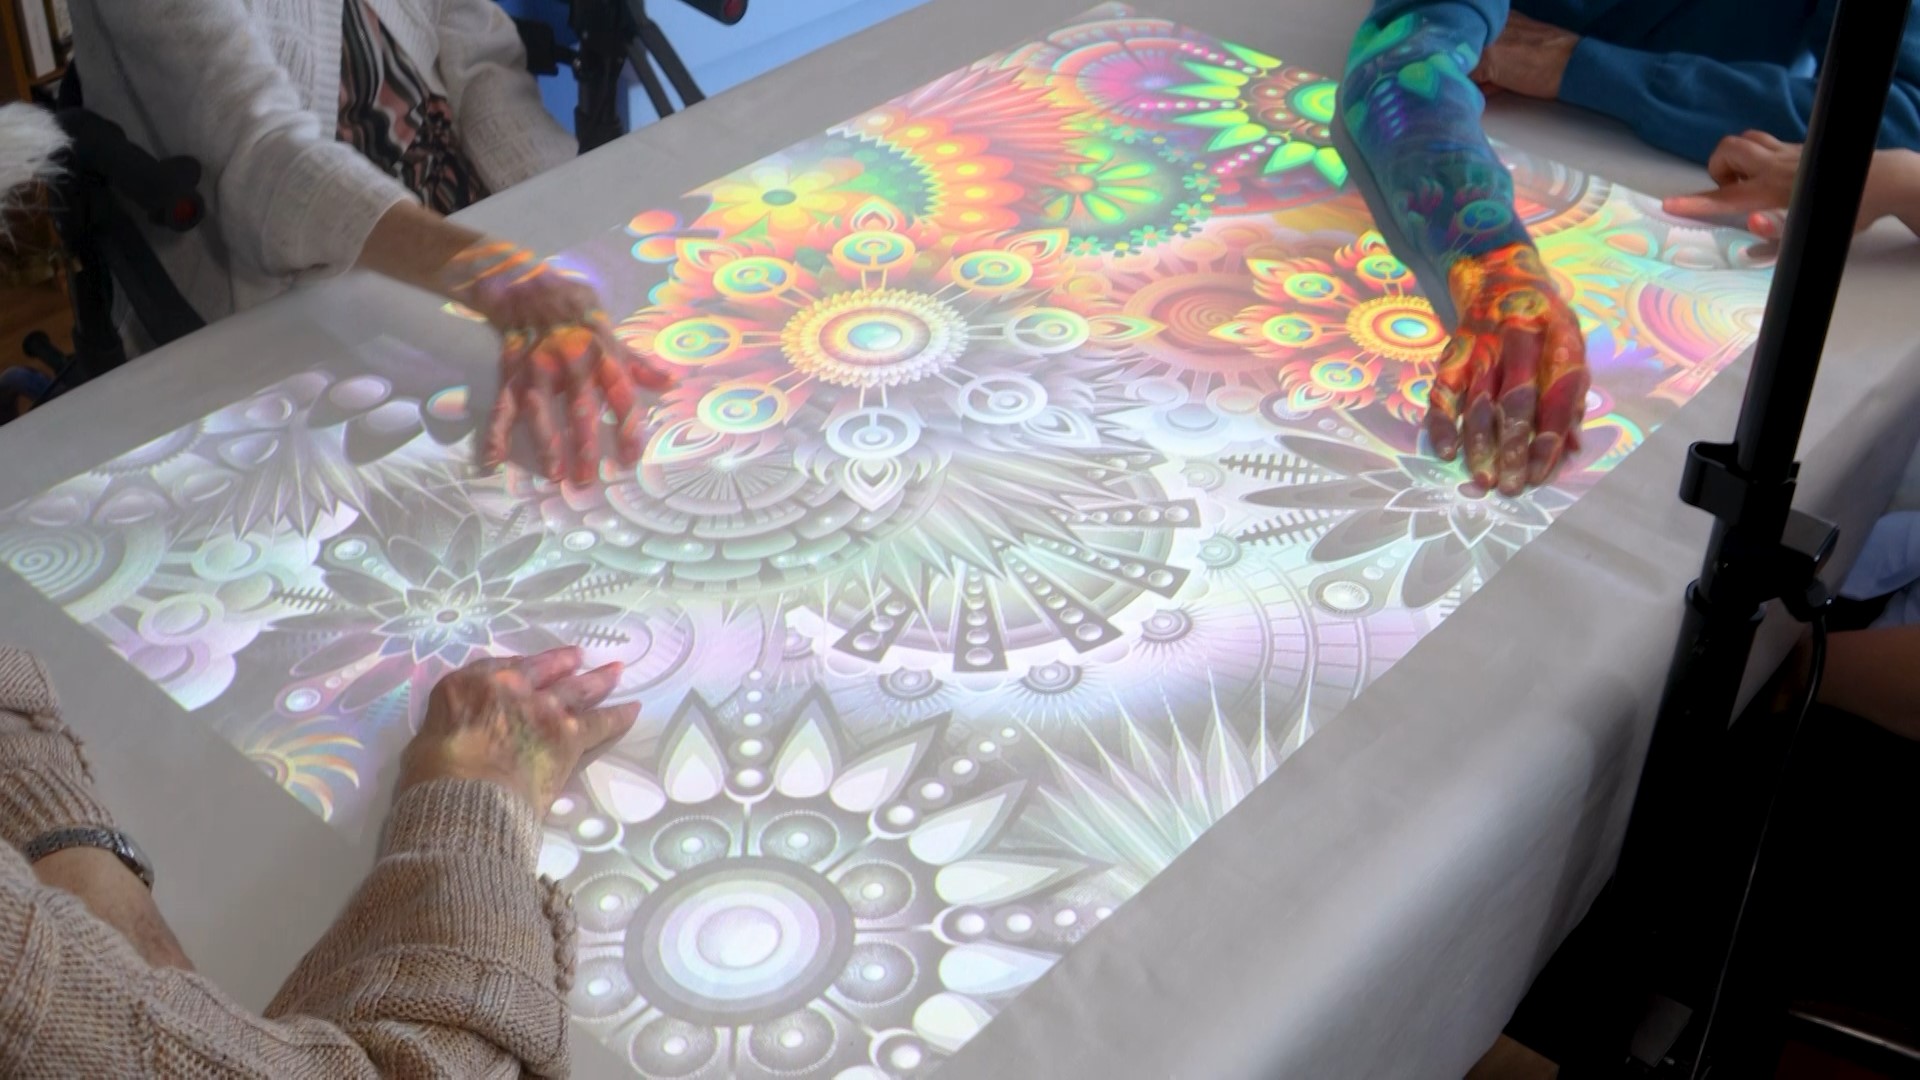 Care home residents taking part in a group activity and unleashing there creativity by colouring in the vibrant images with this art / music activity whilst using the Wellbeing suite interactive projector on a table